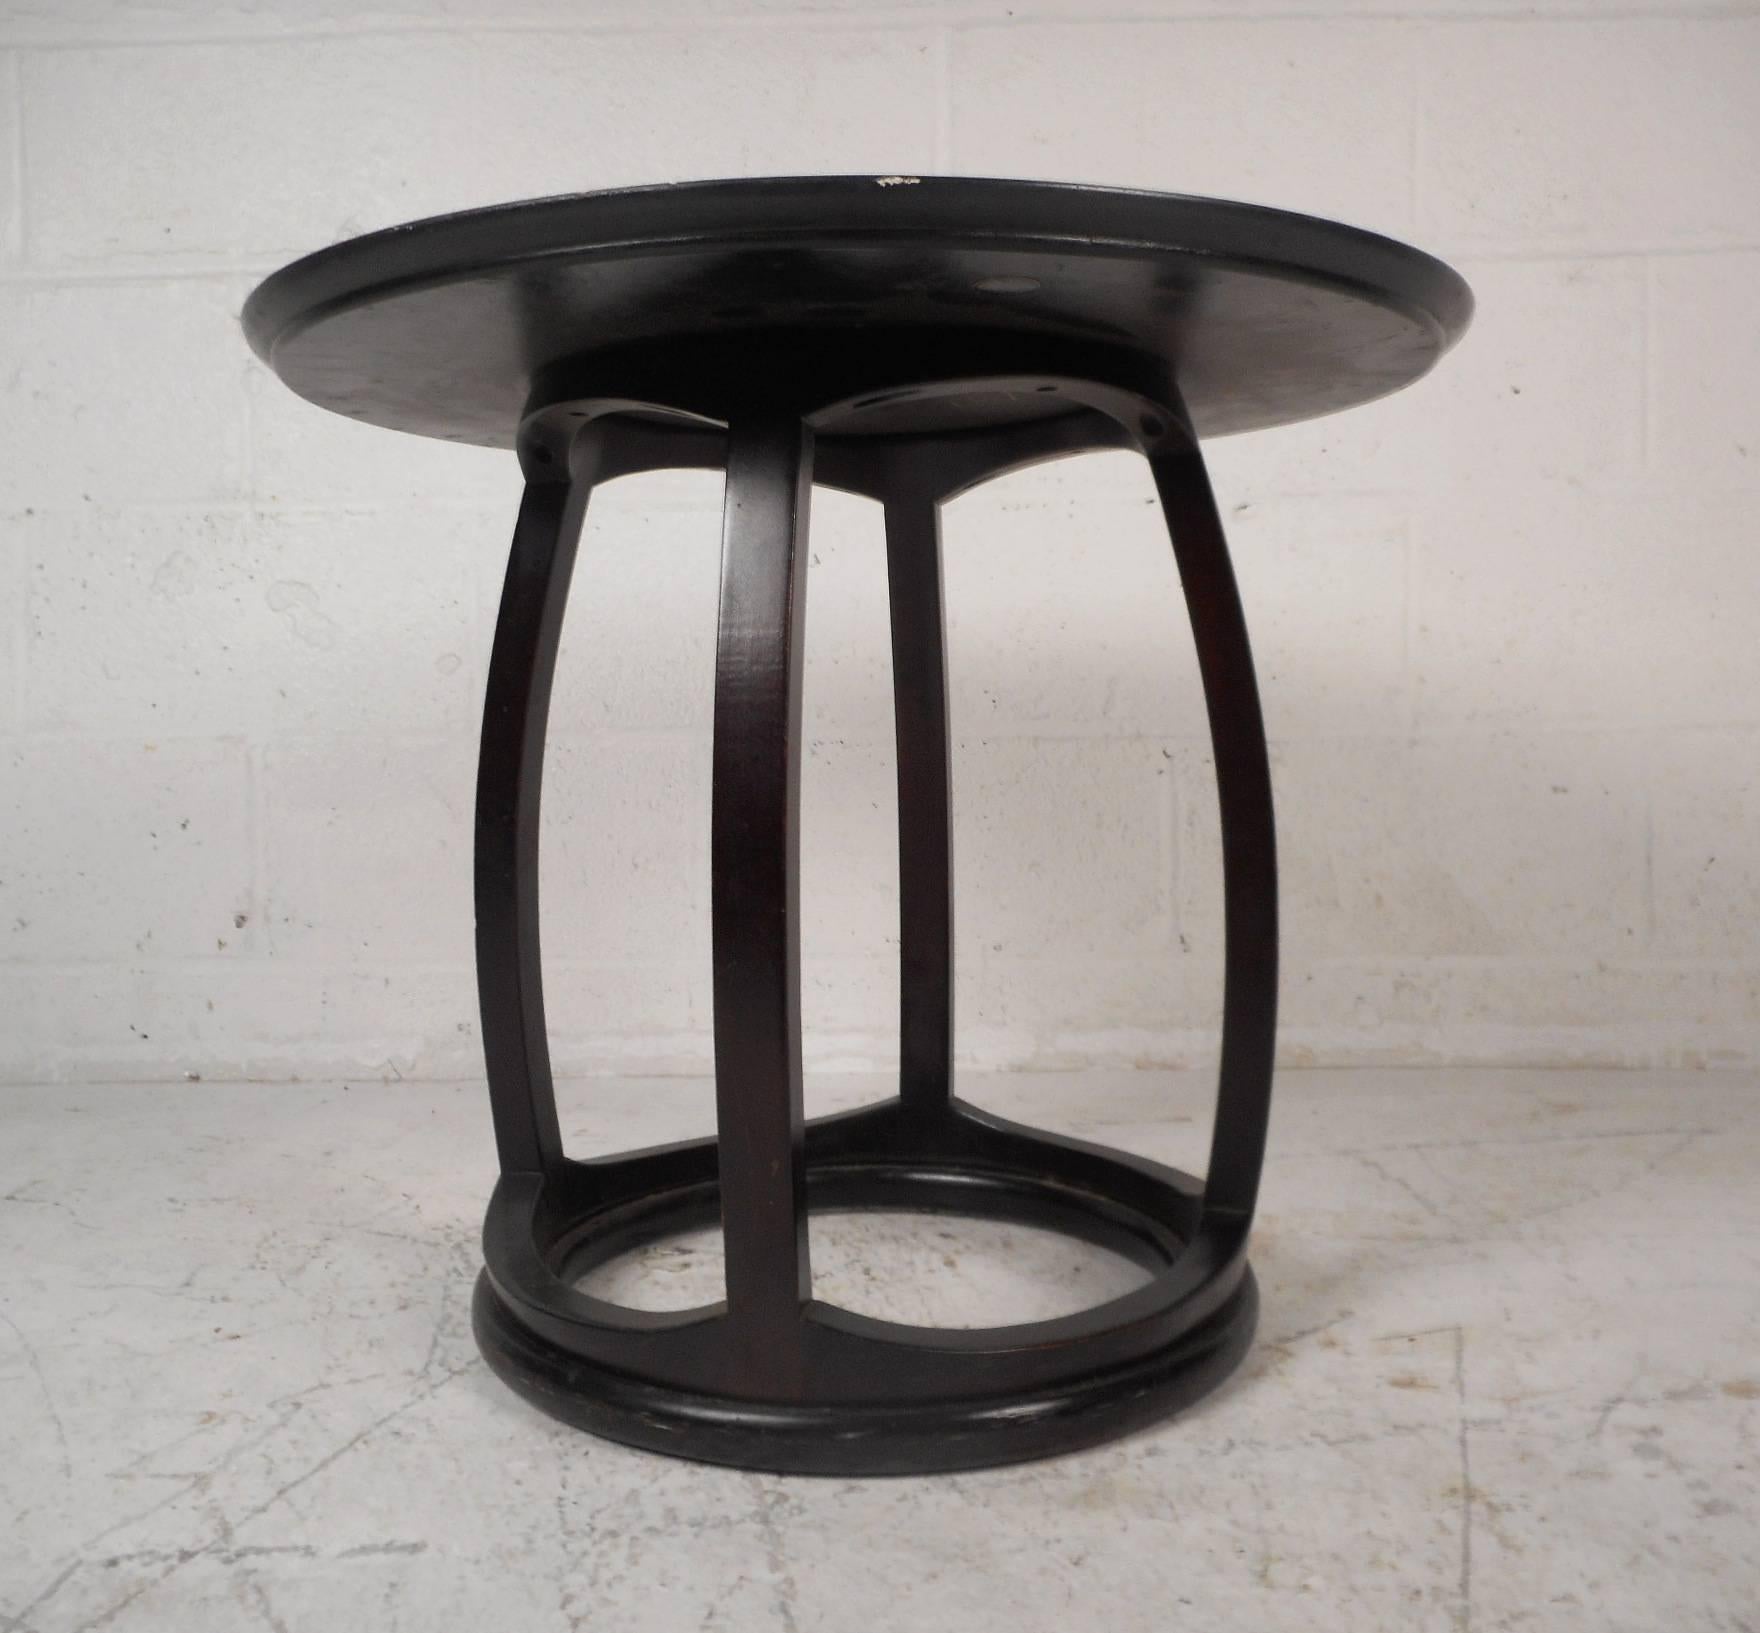 This beautiful vintage modern end table was designed by John Stuart. Sleek design has a round top with wood grain running in different directions. The unique ebonized frame features curved supports connecting to a sturdy open circular base. The